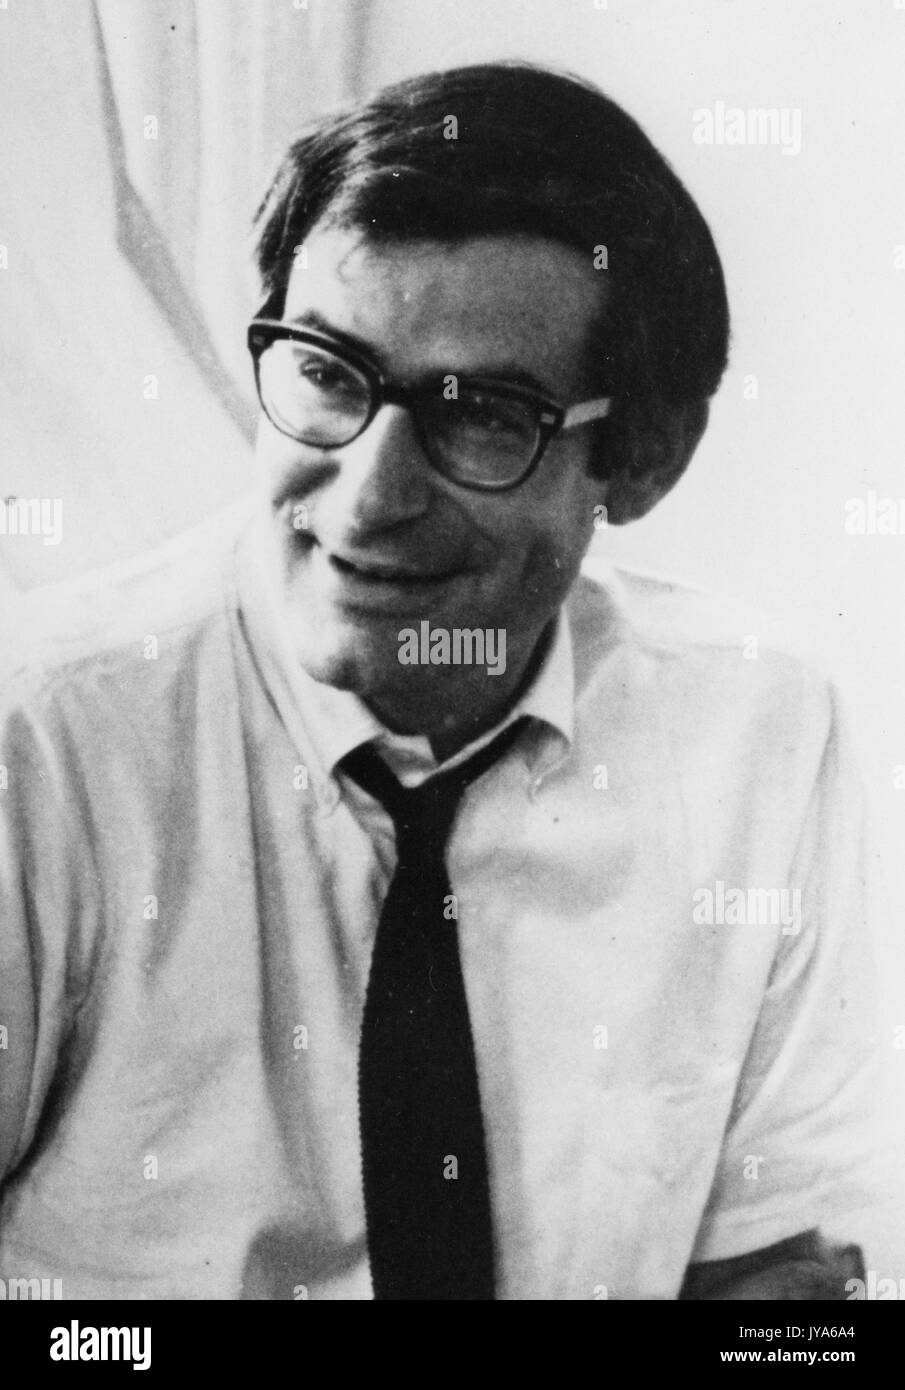 Speaker for the Milton S. Eisenhower Symposium, a lecture series at Johns Hopkins University, David Halberstam, American journalist and historian, smiles off camera wearing a worn-in white button-down with a loose black tie and glasses. 1975. Stock Photo